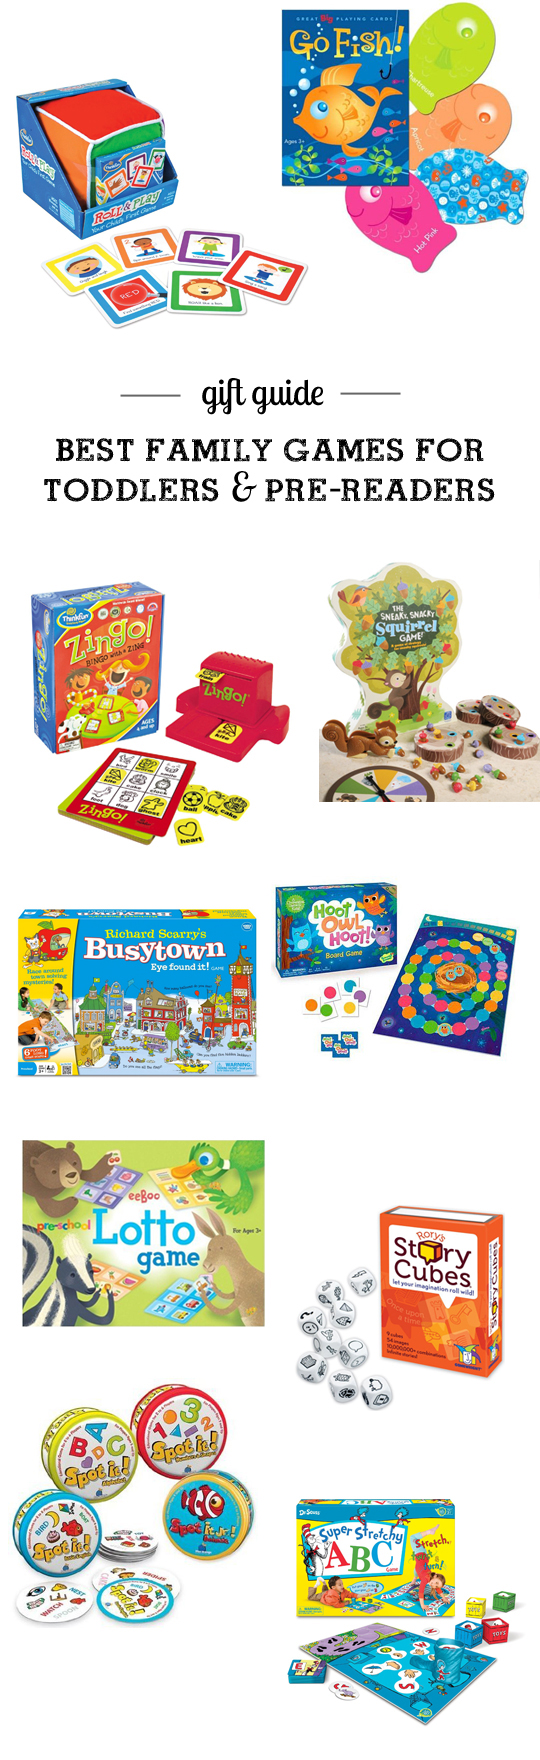 MPMK Toy Gift Guides: Best Games for Pre-Readers and best games for toddlers. This is an amazing resource full of so many great detailed suggestions with age recommendations. LOVE!!